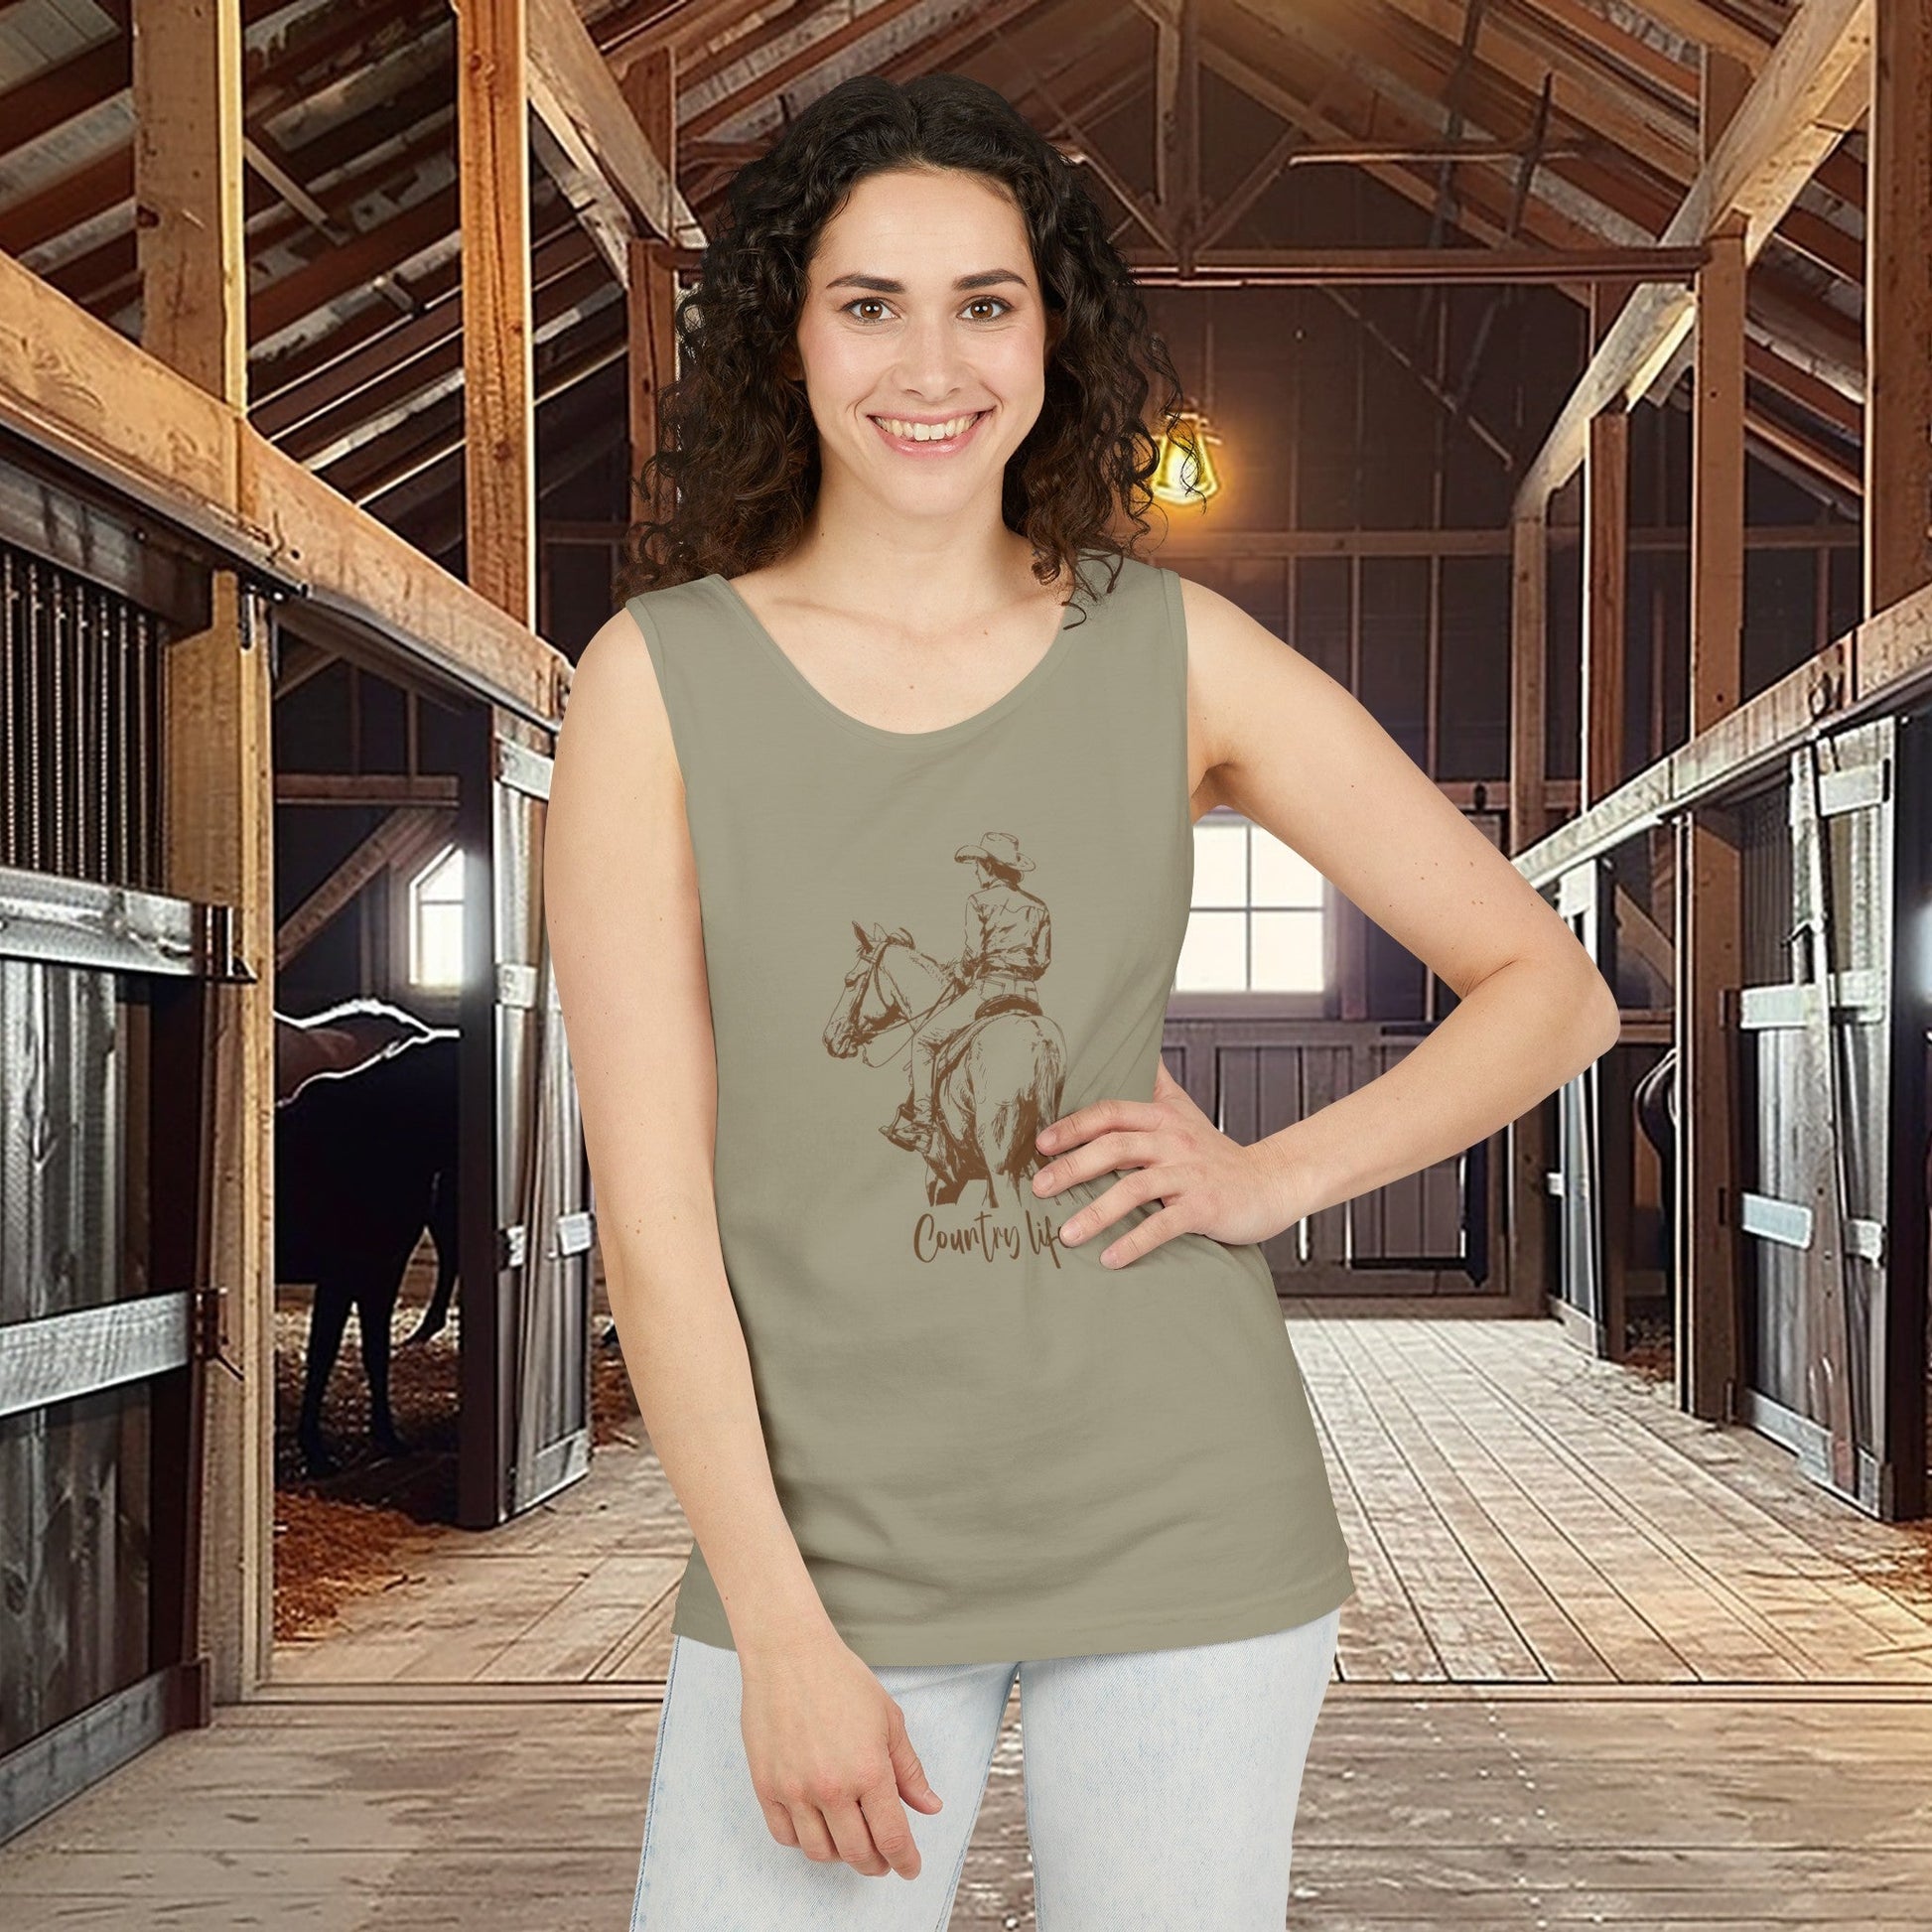 Comfort Color Western Tank Top, New Horse Drawing, "Country Life" - FlooredByArt